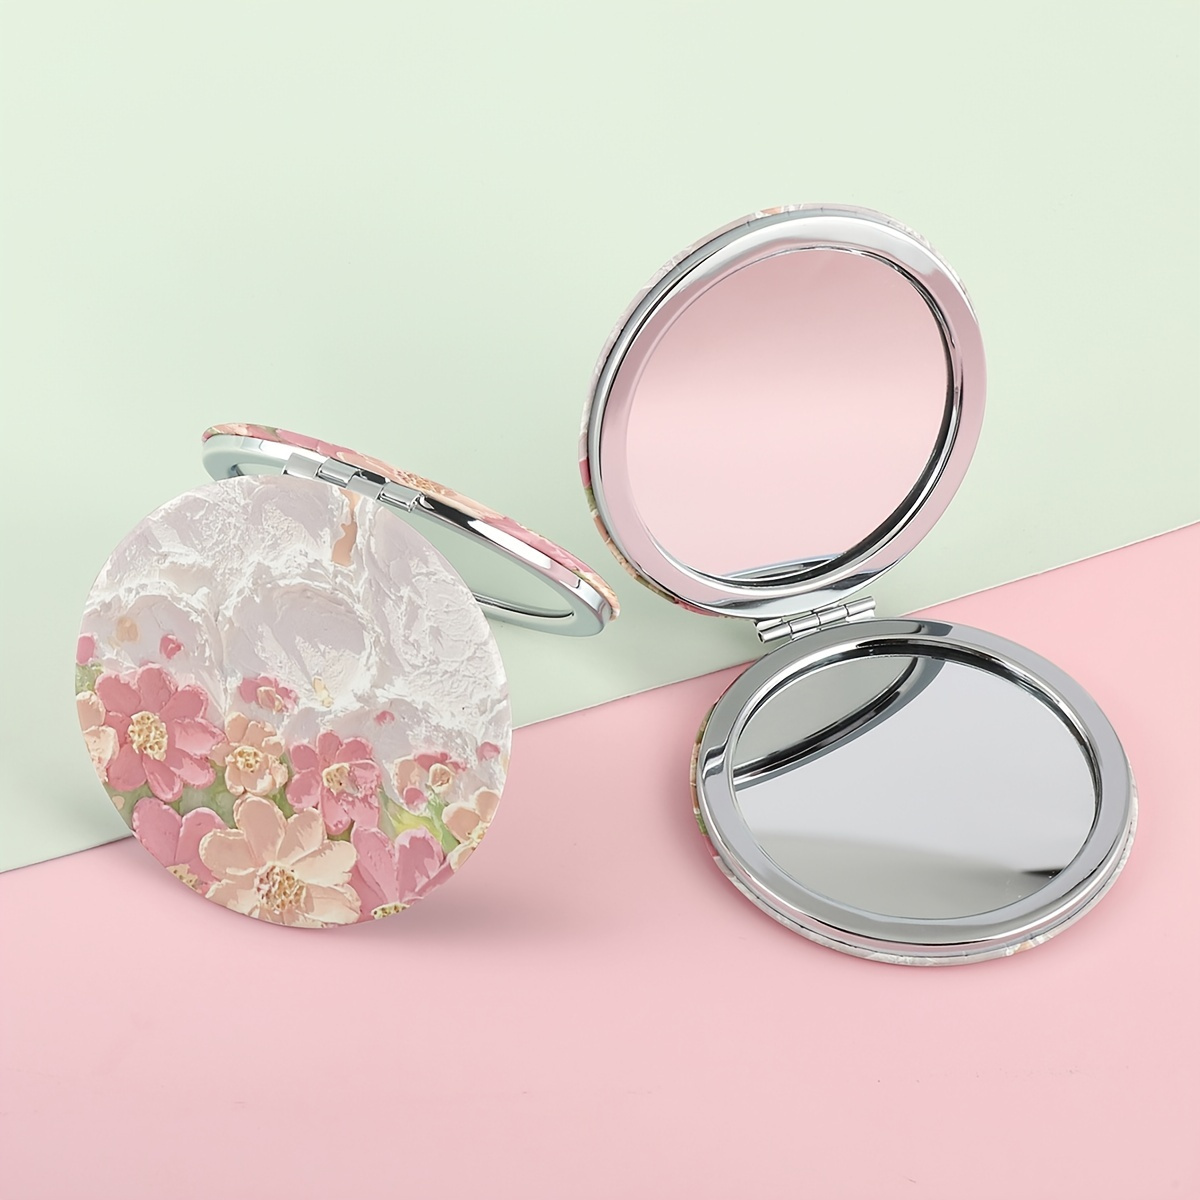 

Compact Flower Mirror For Women, Round Mini Pocket Makeup Mirror For Purse, Cute Floral Portable Folding Travel Mirror